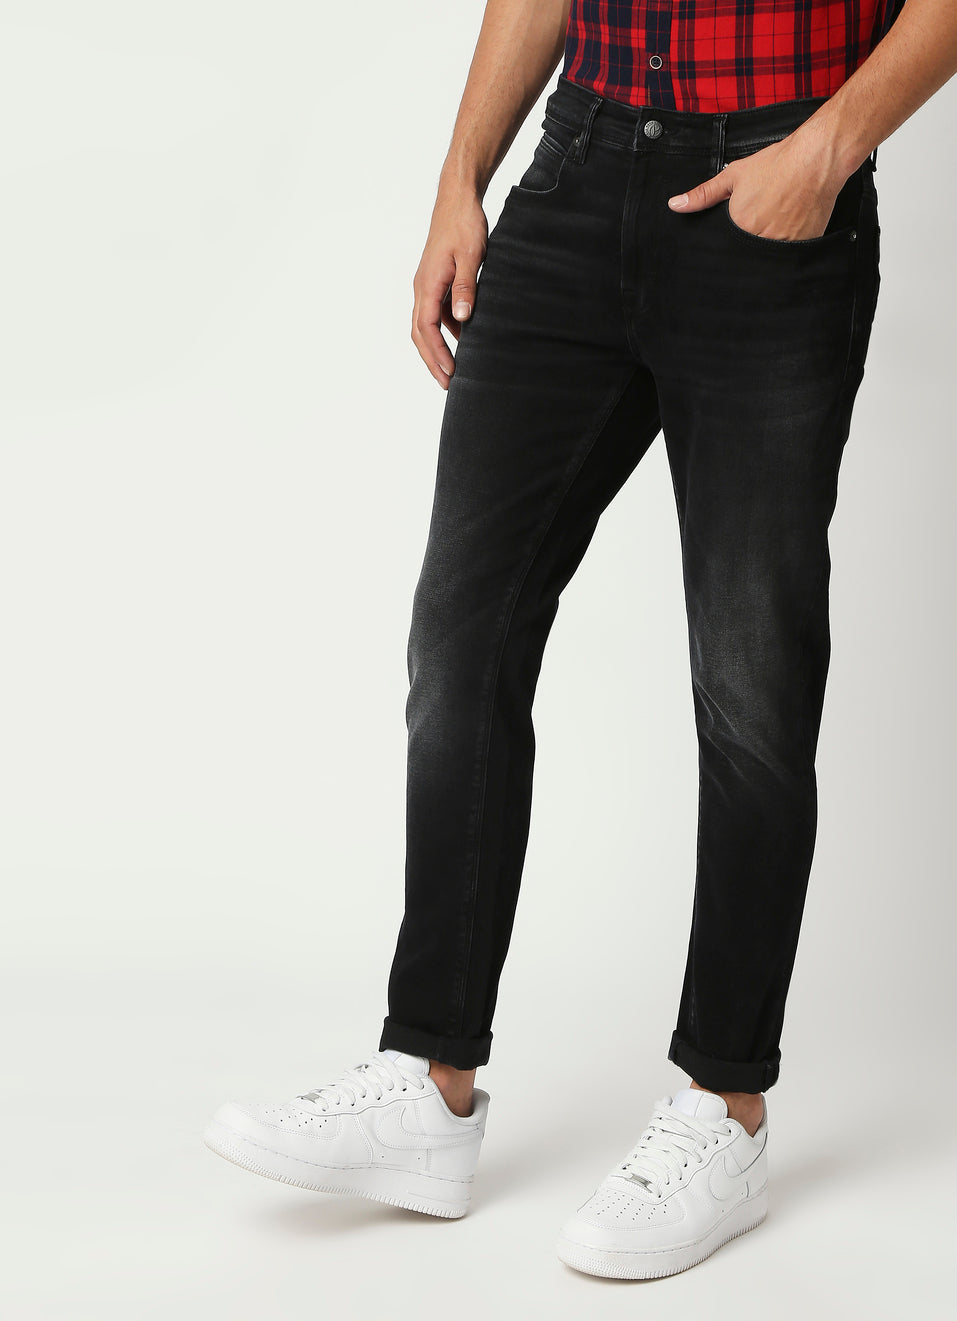 PEPE JEANS FREDDY IP PM206921-MED TINT DENIM PANT (JEANS) (M)